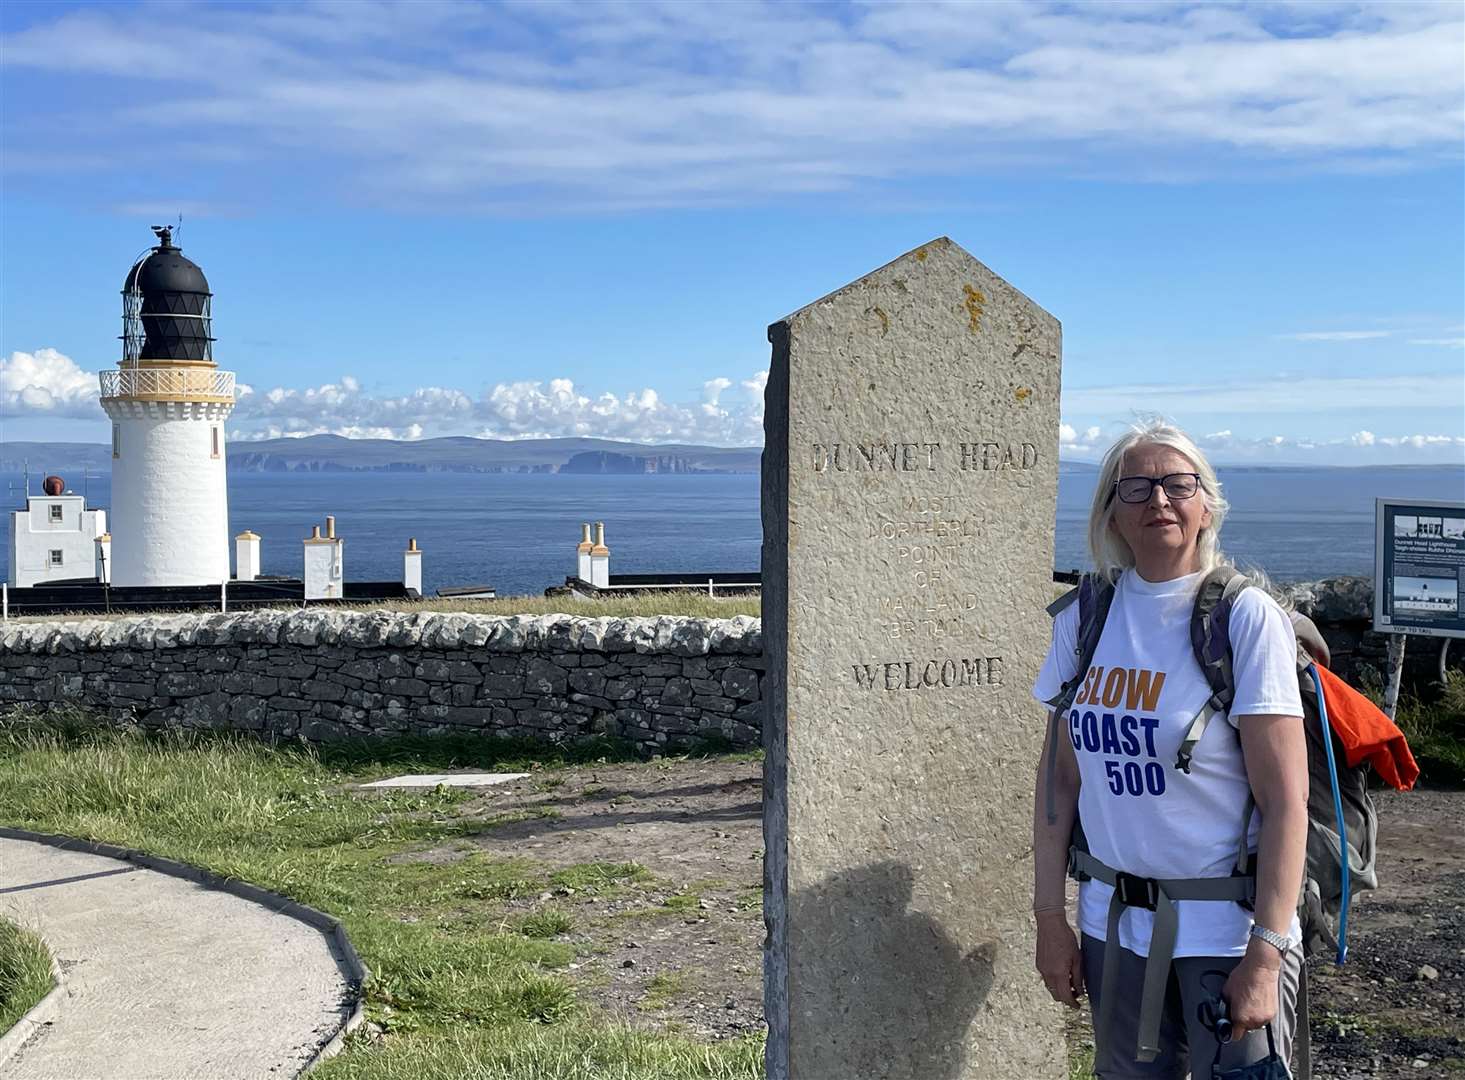 Claudia Zeiske at Dunnet Head at the start of her Slow Coast 500 walk.